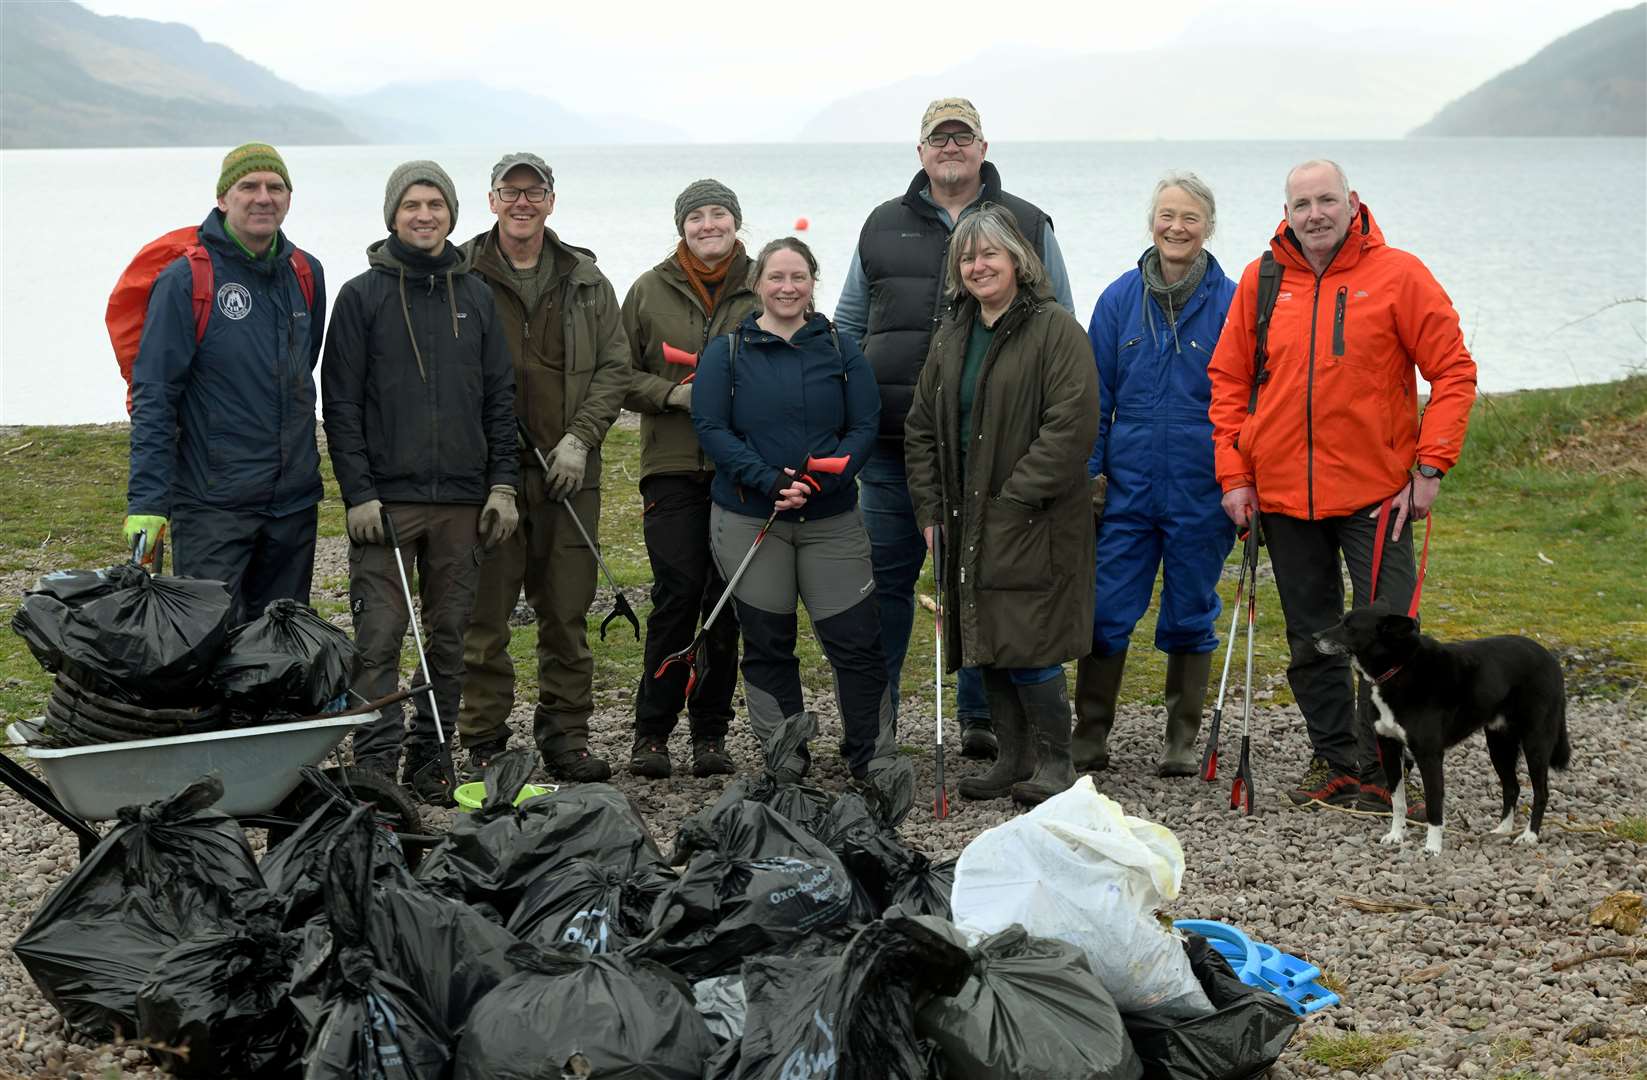 Tim Francis, The Highland Council Ranger Service, Gordon Brown, Elliott Forsyth, Maggie Maciver, Claire Driver, Simon Driver, Louise Robertson, Fiona King, John Orr, High Life Highland and Jake the Romanian rescue dog. Picture: James Mackenzie